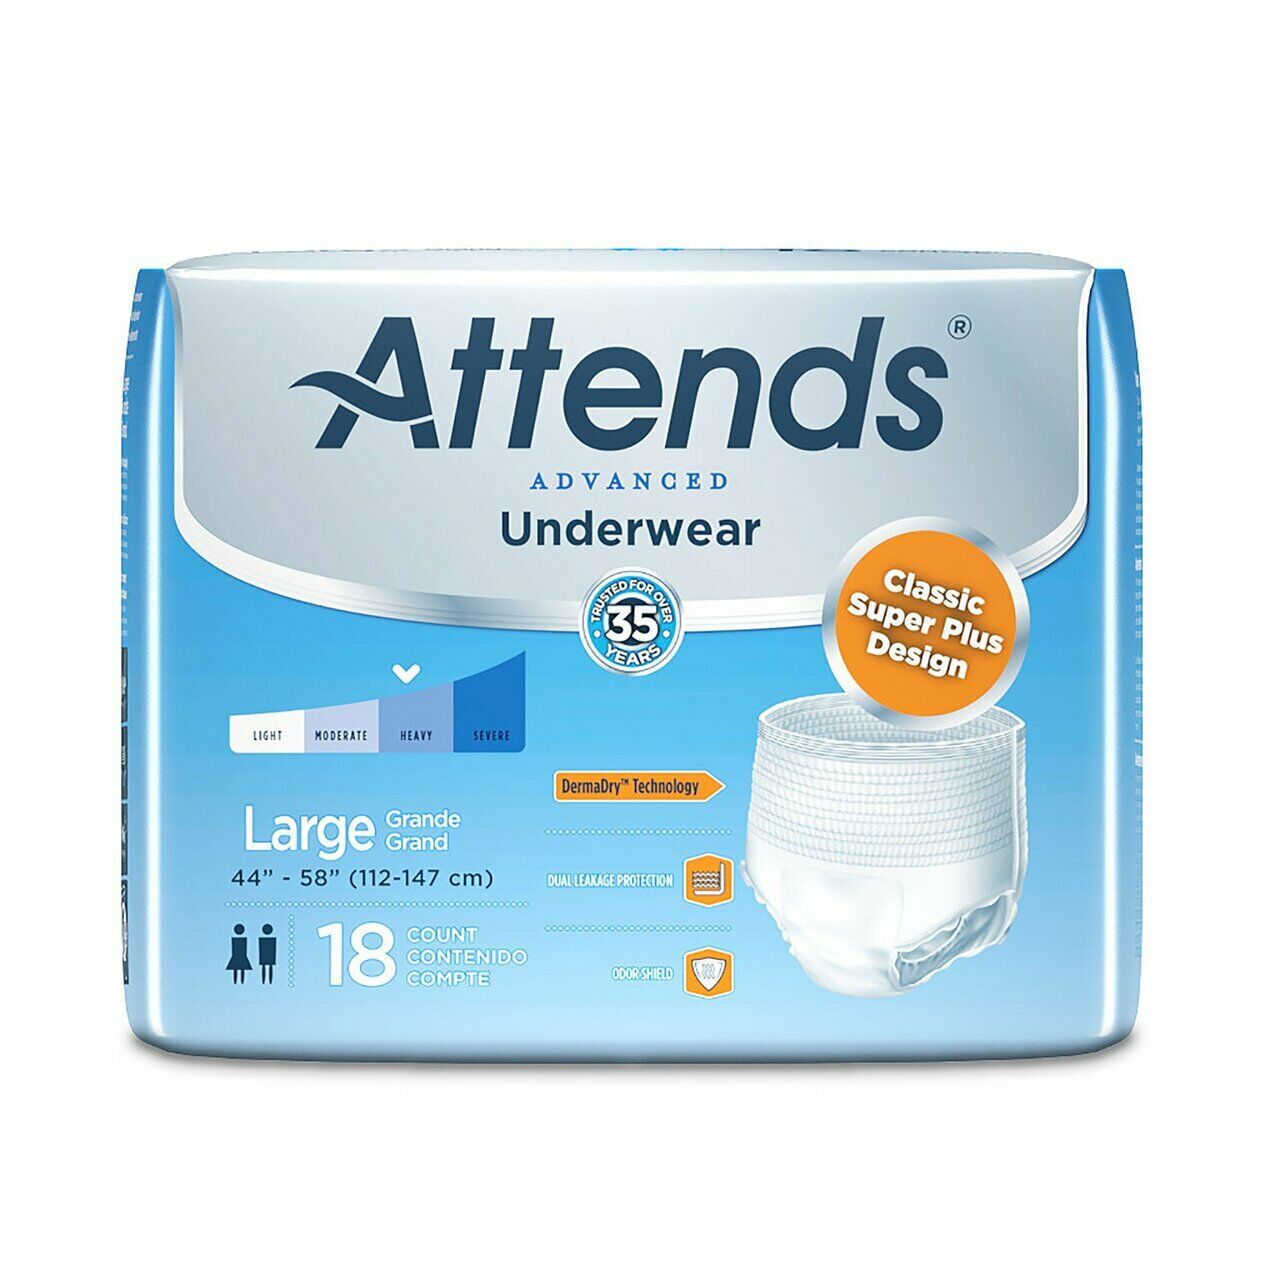 Attends Advanced Pull Up Incontinence Underwear Diapers Moderate / Heavy, Medium, Large, XL